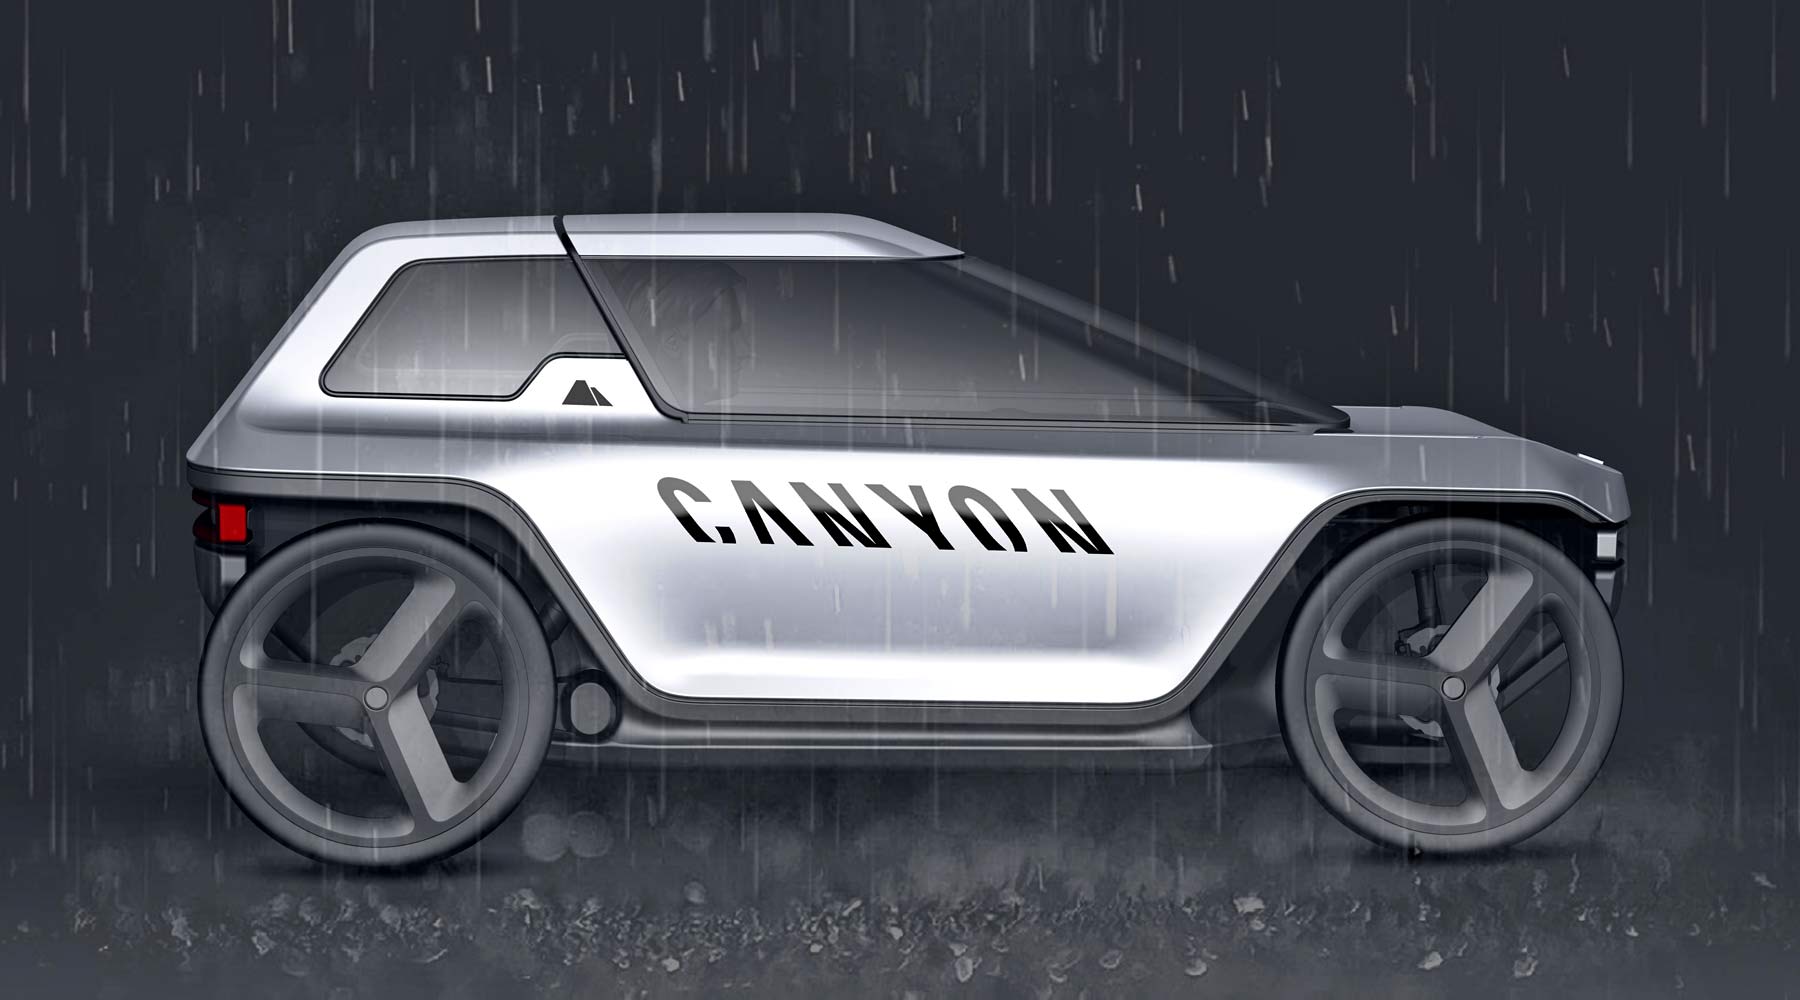 Canyon Future Mobility Concept, electric-assist commuter pedal car, prototype micro car, rendering in the rain